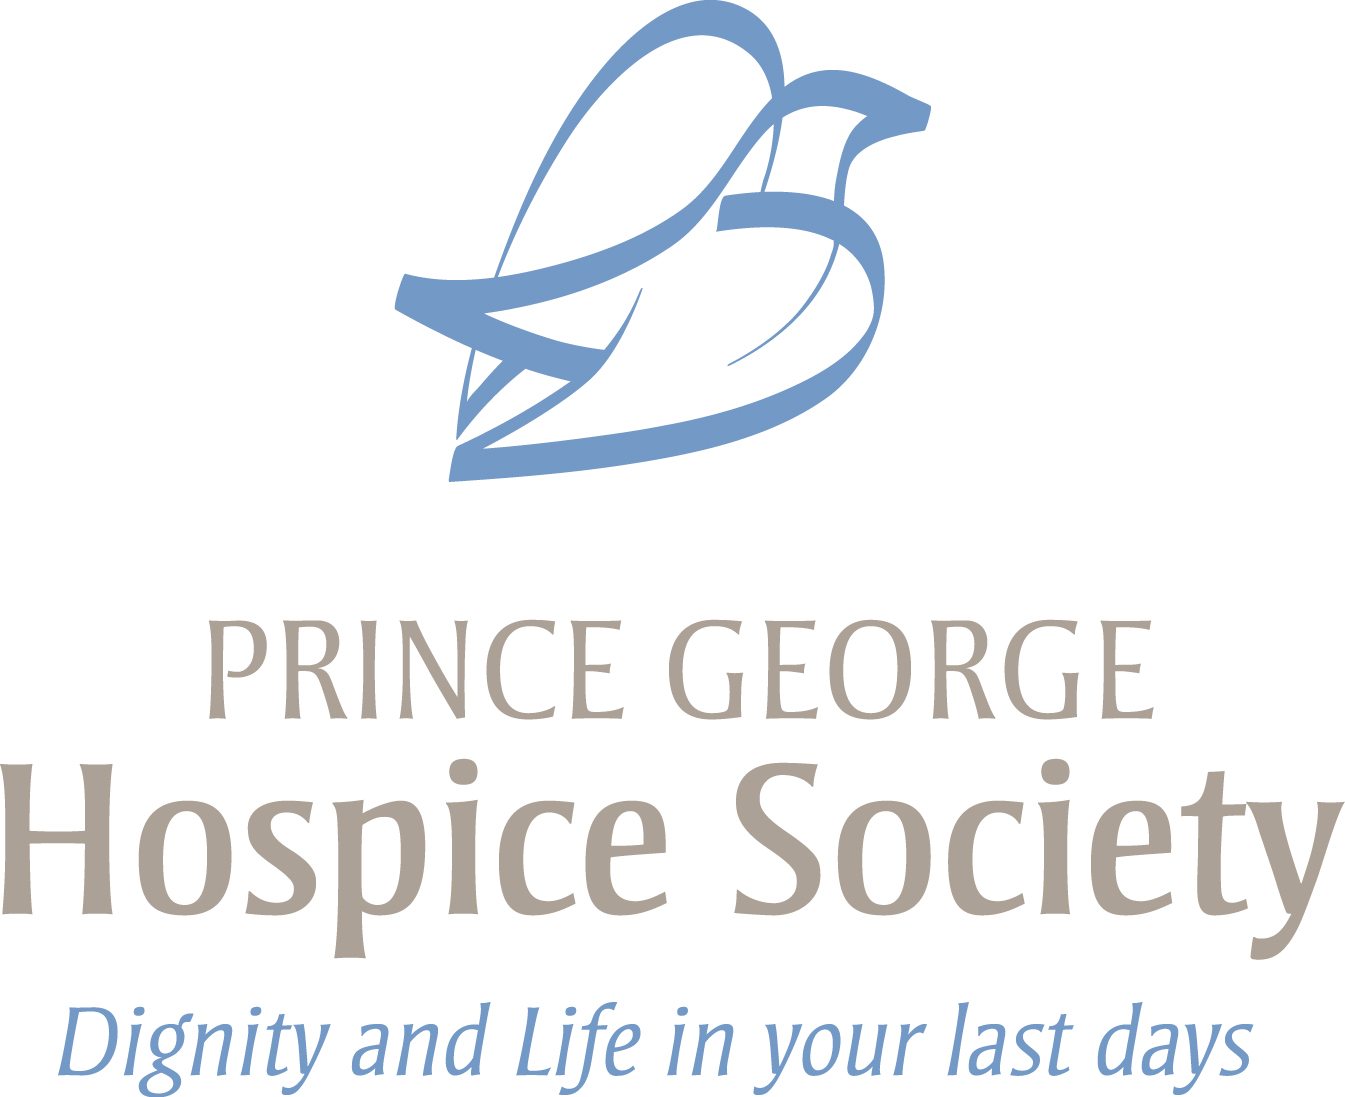 PG Hospice Society offer tips for those grieving this Christmas